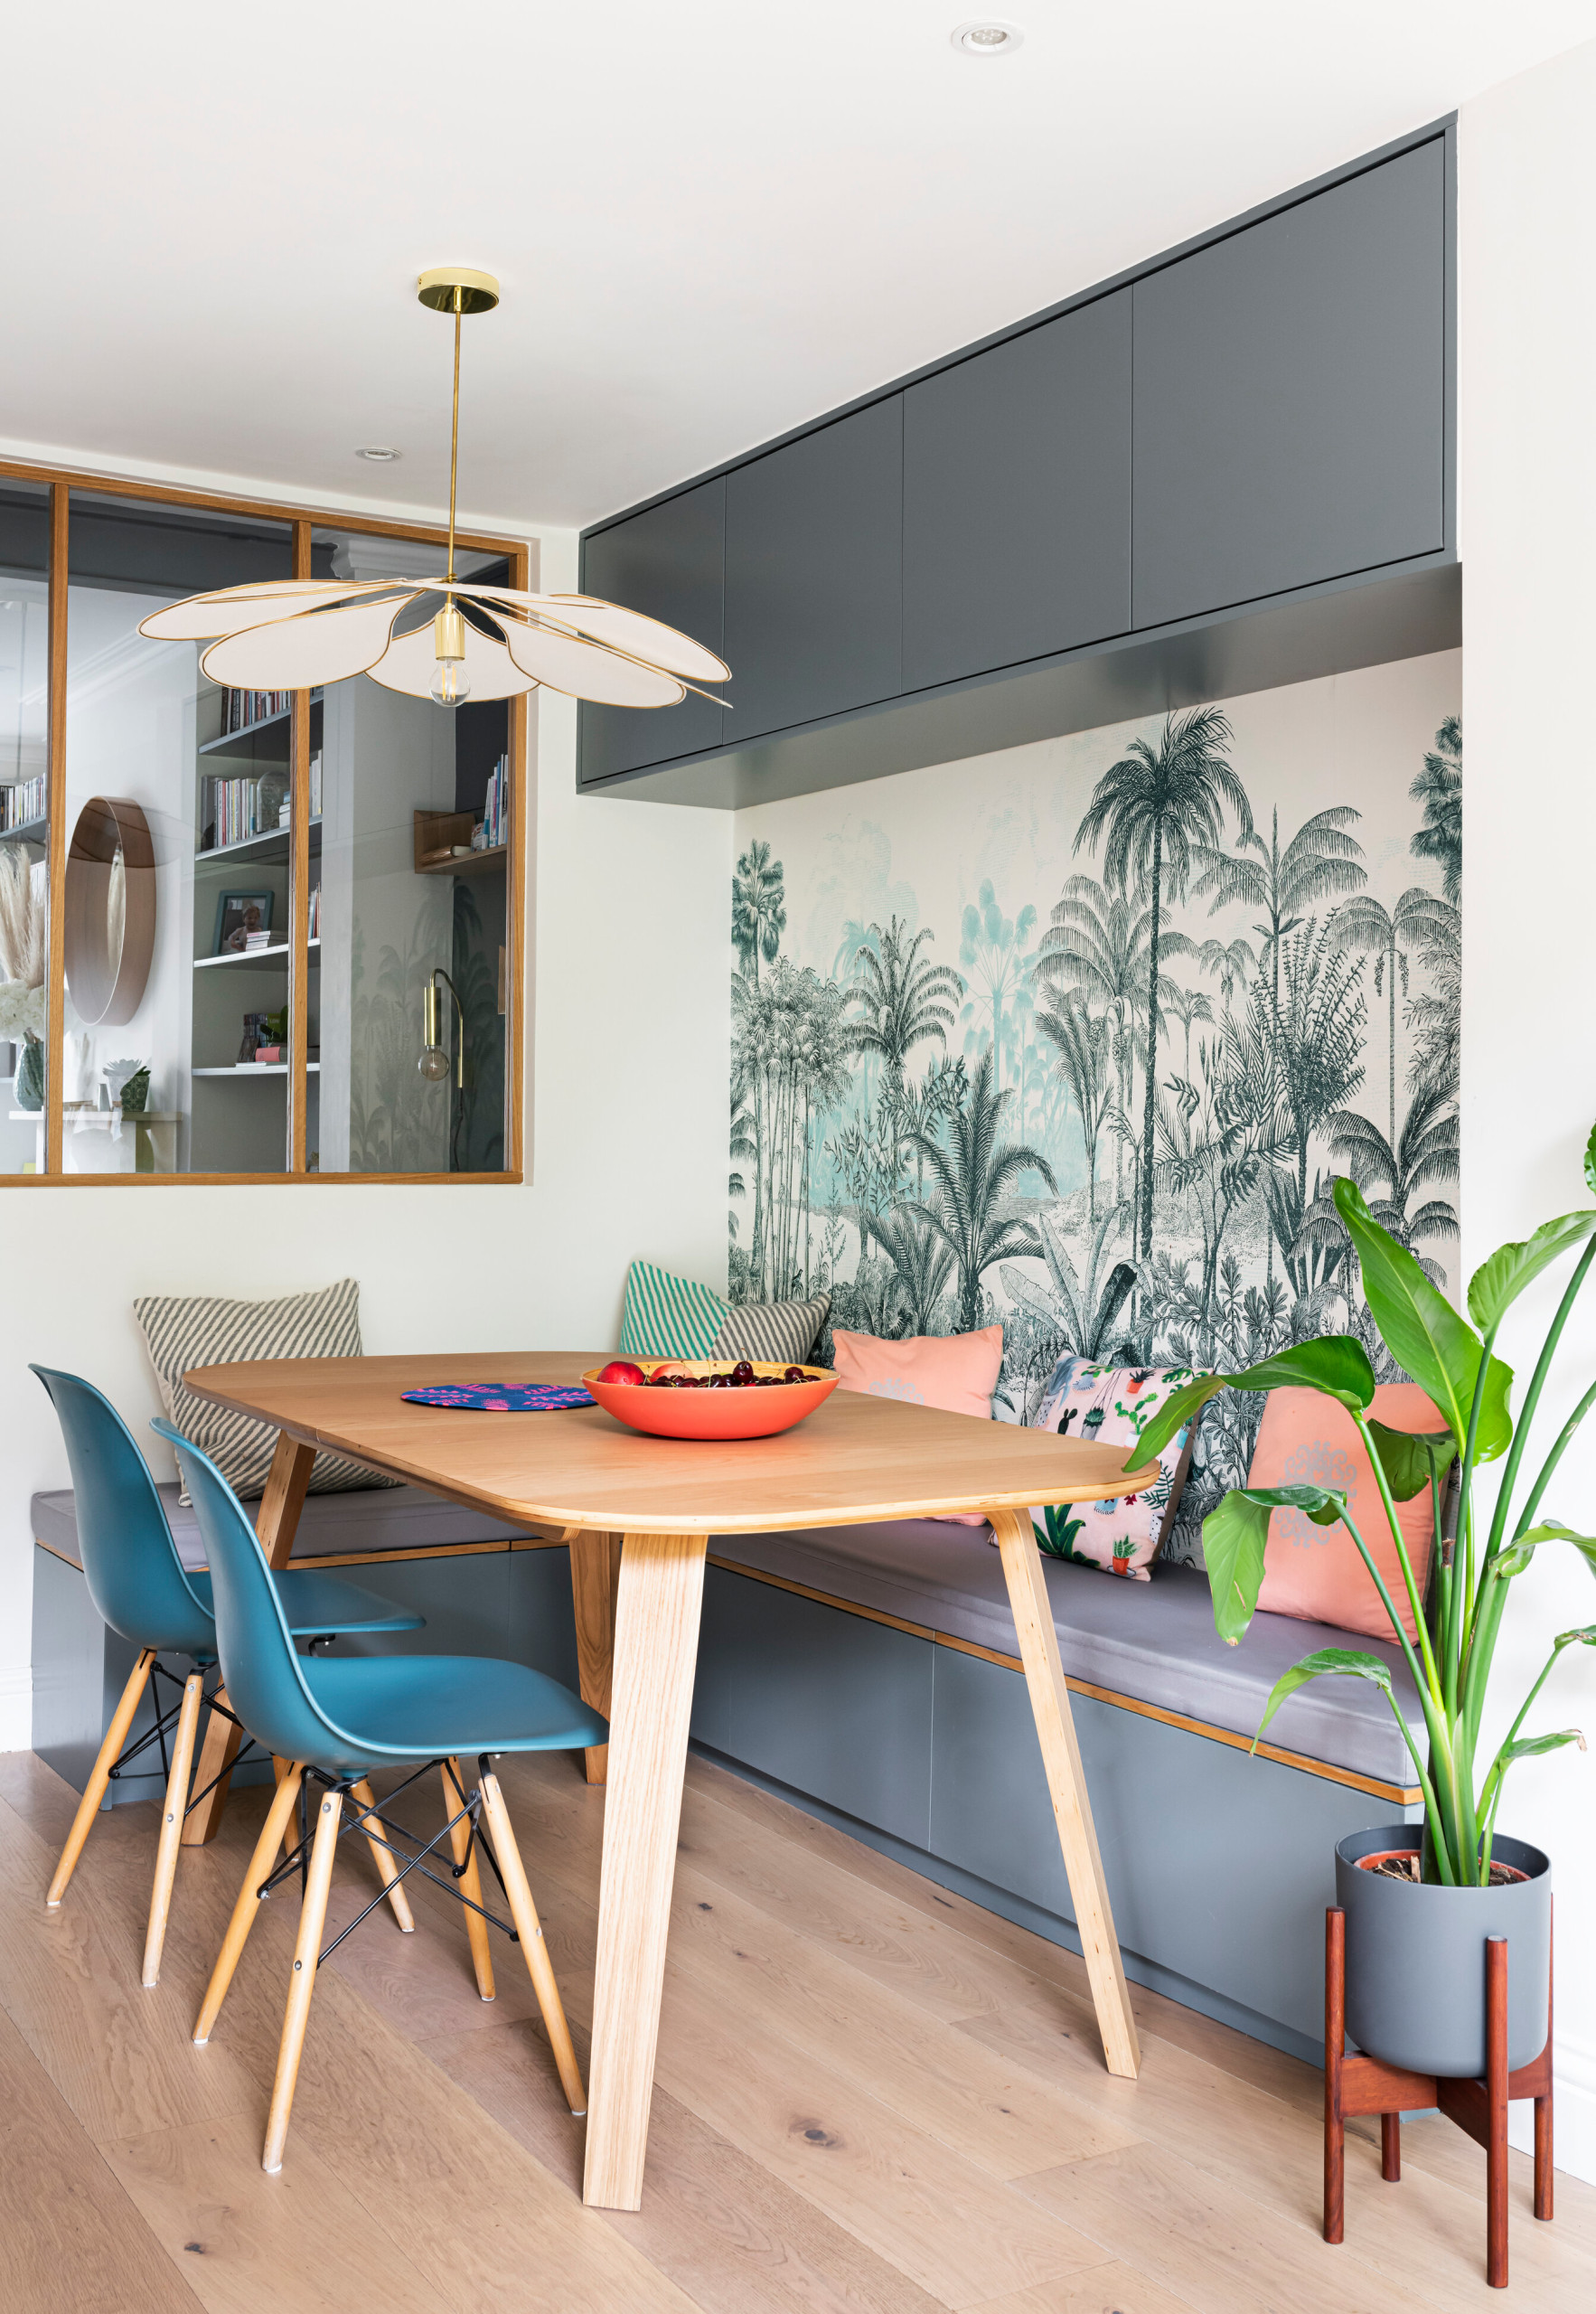 75 Beautiful Small Dining Room Ideas and Designs - July 2023 | Houzz UK